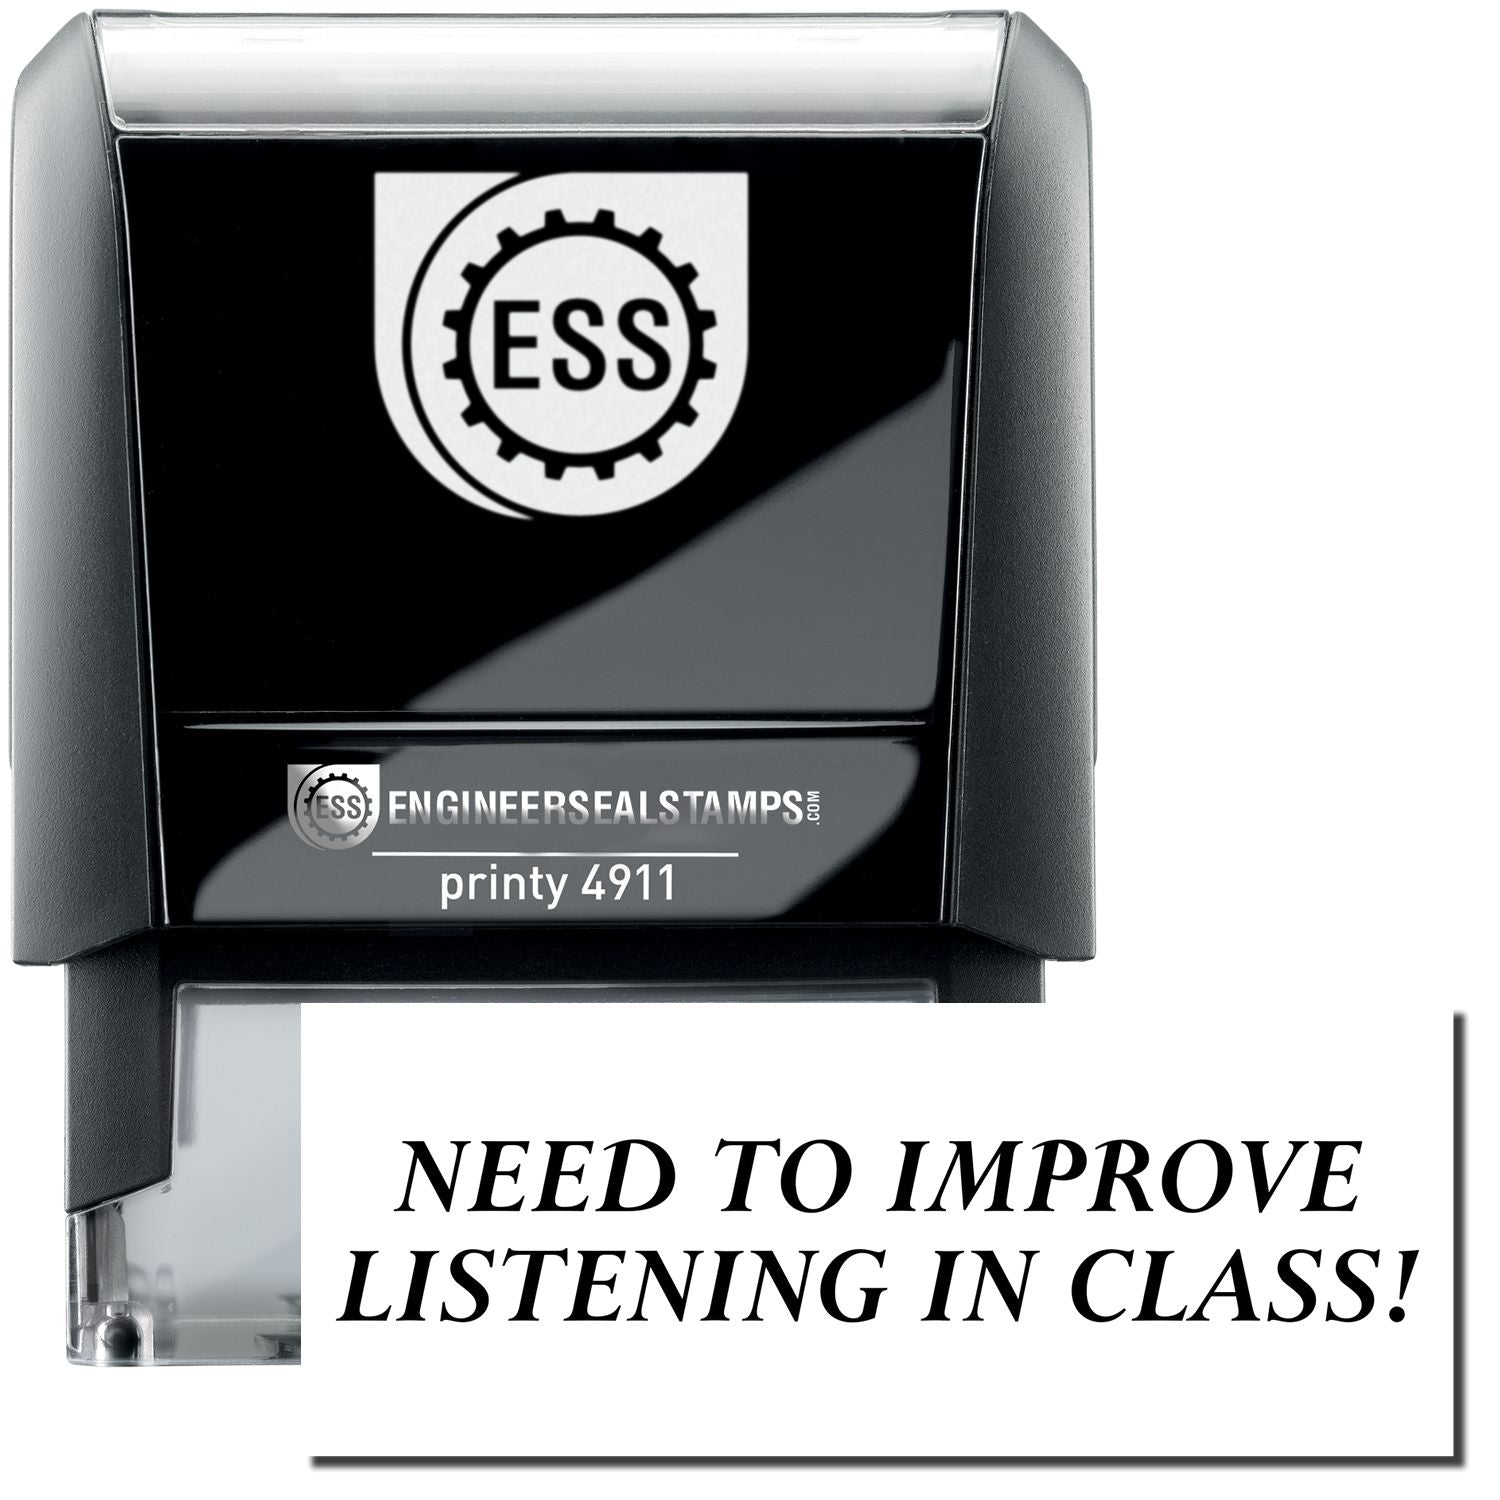 A self-inking stamp with a stamped image showing how the text "NEED TO IMPROVE LISTENING IN CLASS!" is displayed after stamping.